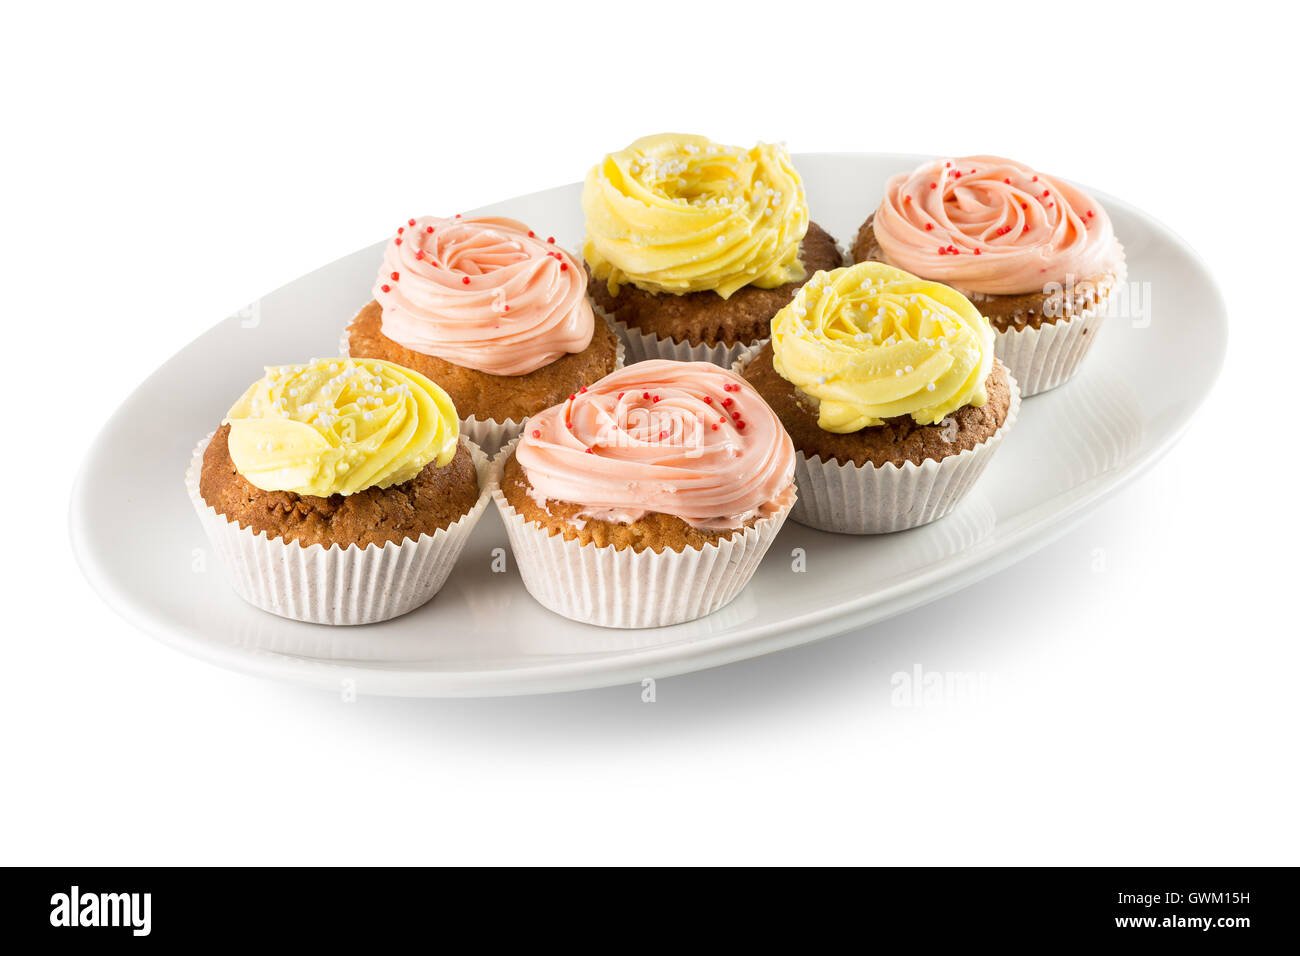 cupcakes with cream on white plate. Stock Photo